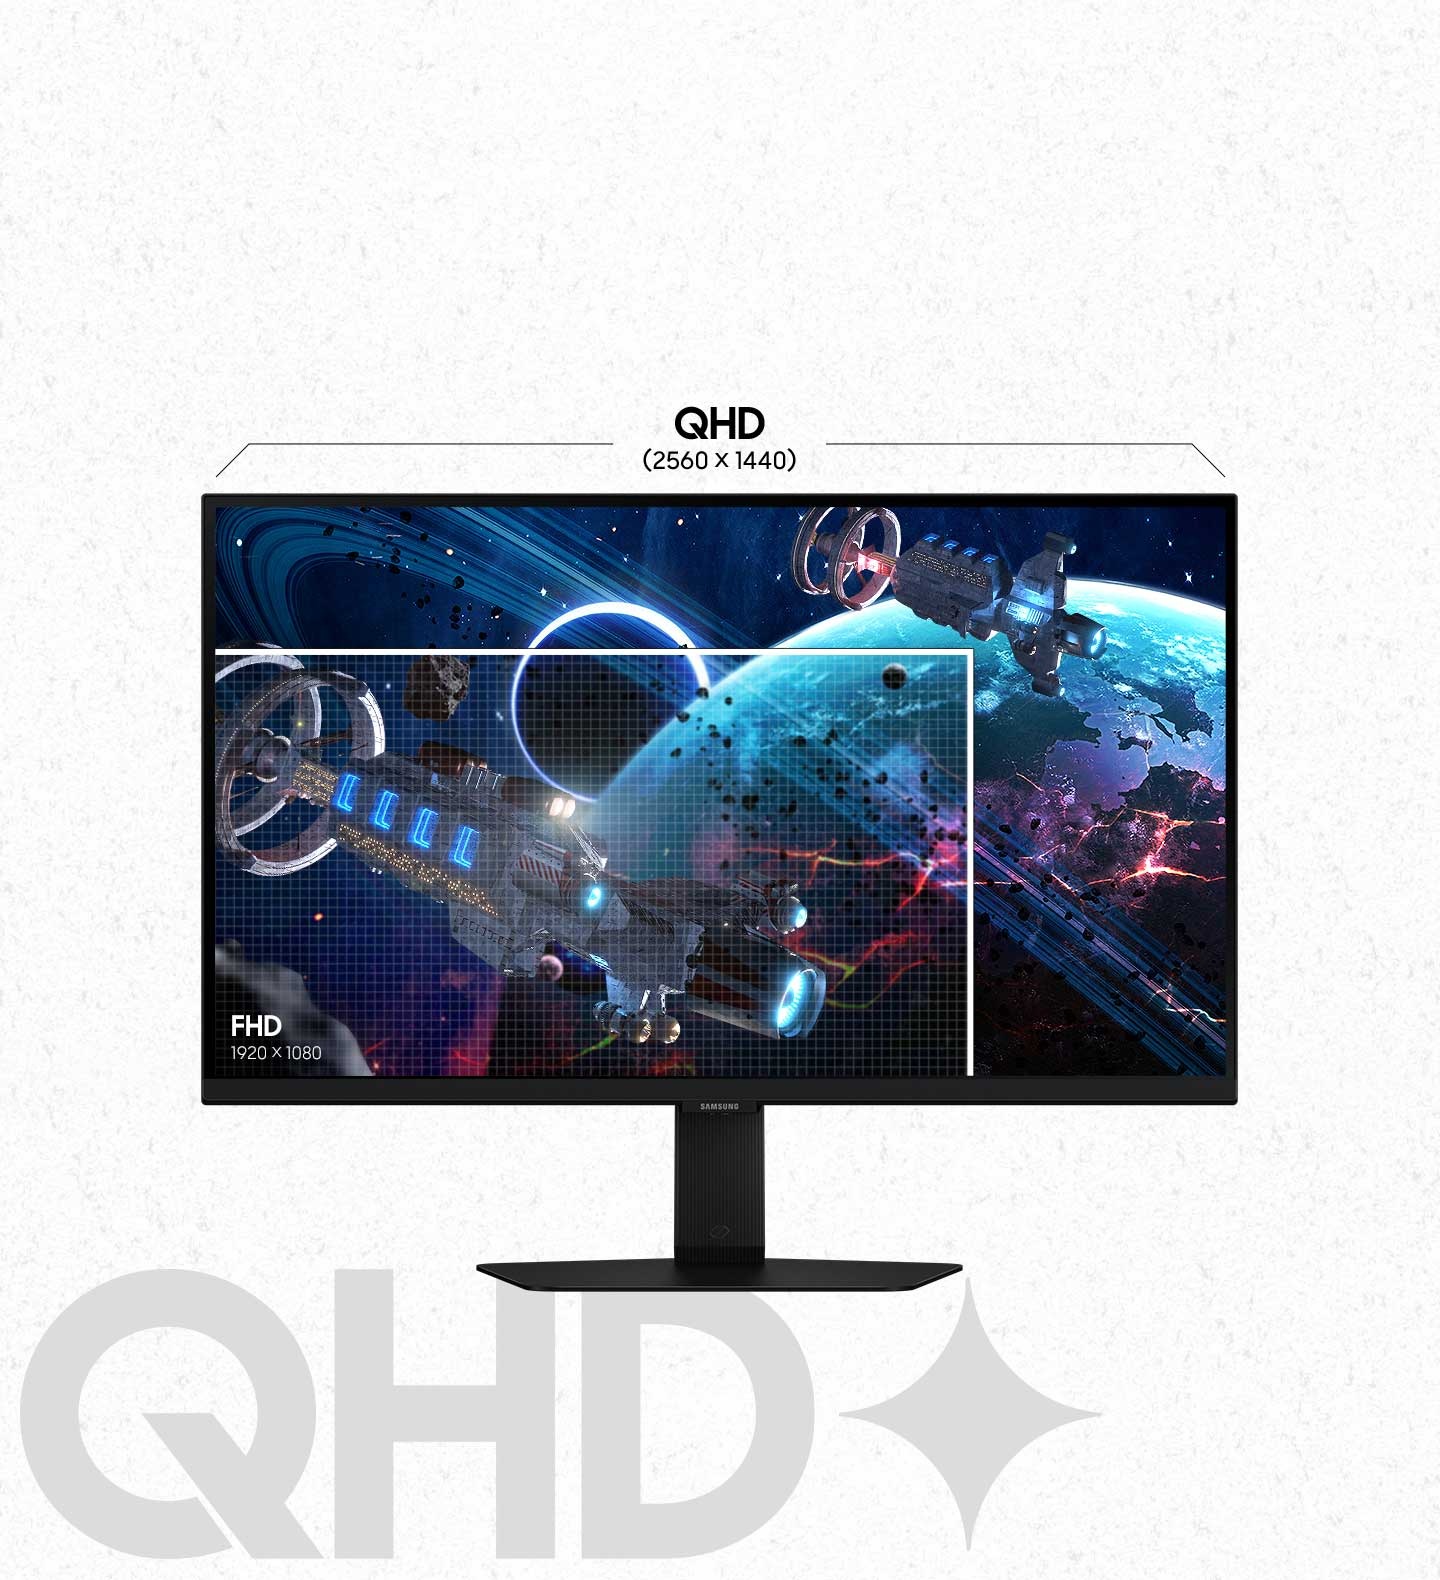 The monitor shows pixel density comparison between 1920x1080 pixel FHD high definition and 2560x1440 pixel QHD high definition by dividing the screen into two different regions. QHD high definition shows richer, more detailed ship and planetary surfaces. A text below the monitor communicates the specs: “QHD”